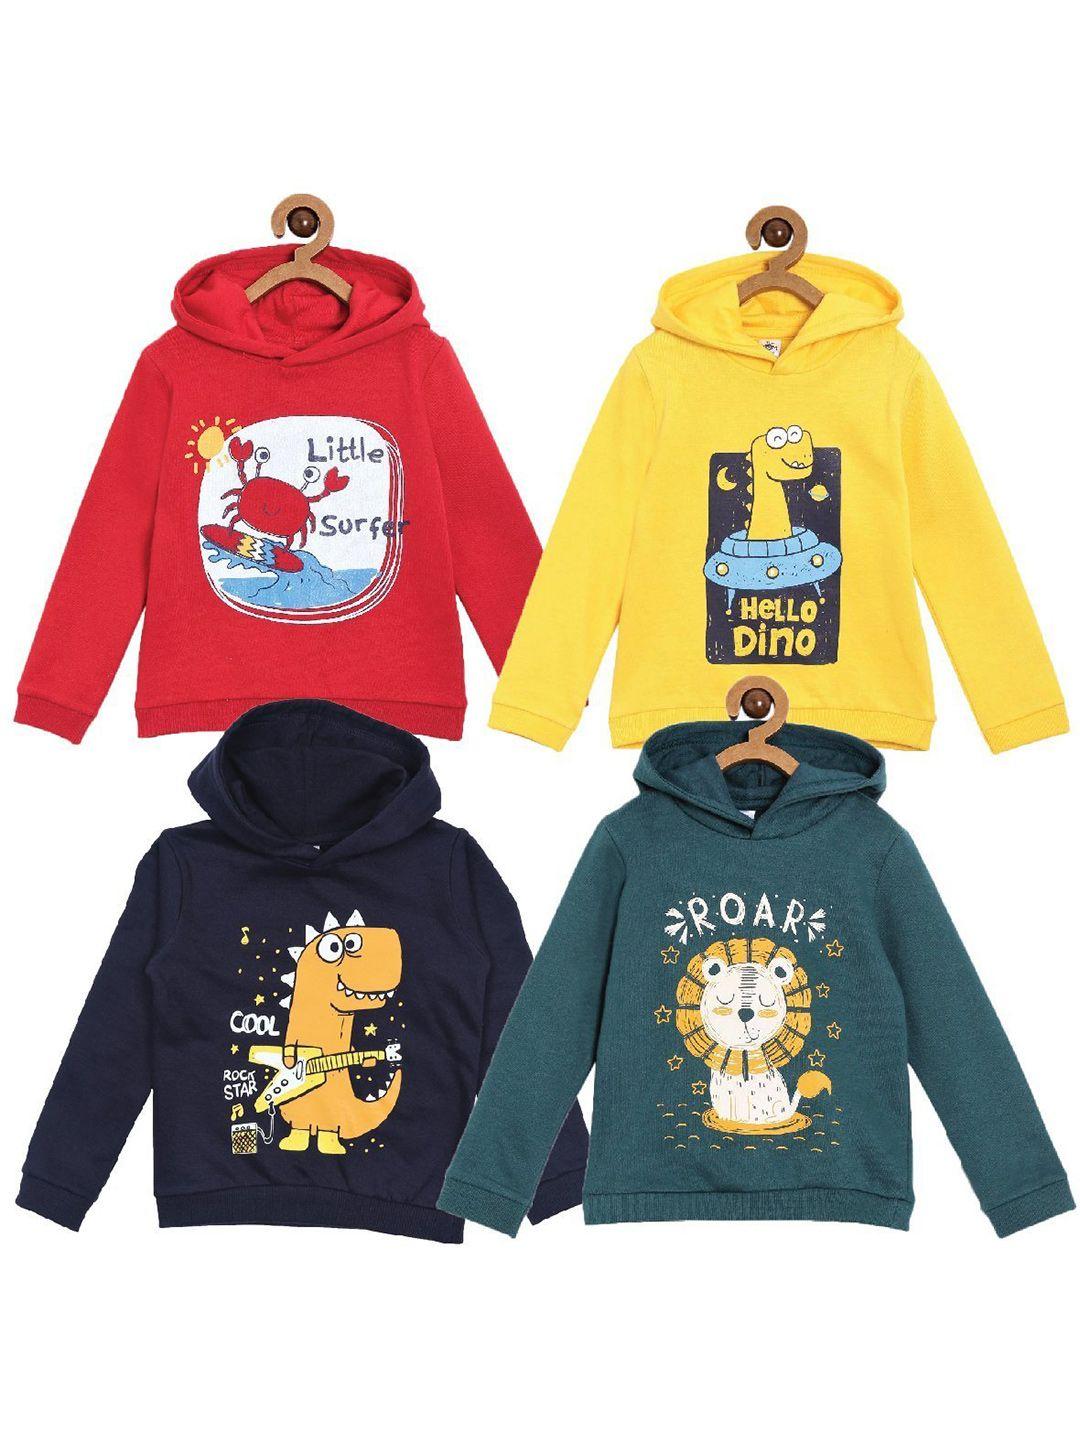 The Mom Store Boys Pack of 4 Printed Hooded Cotton Sweatshirt